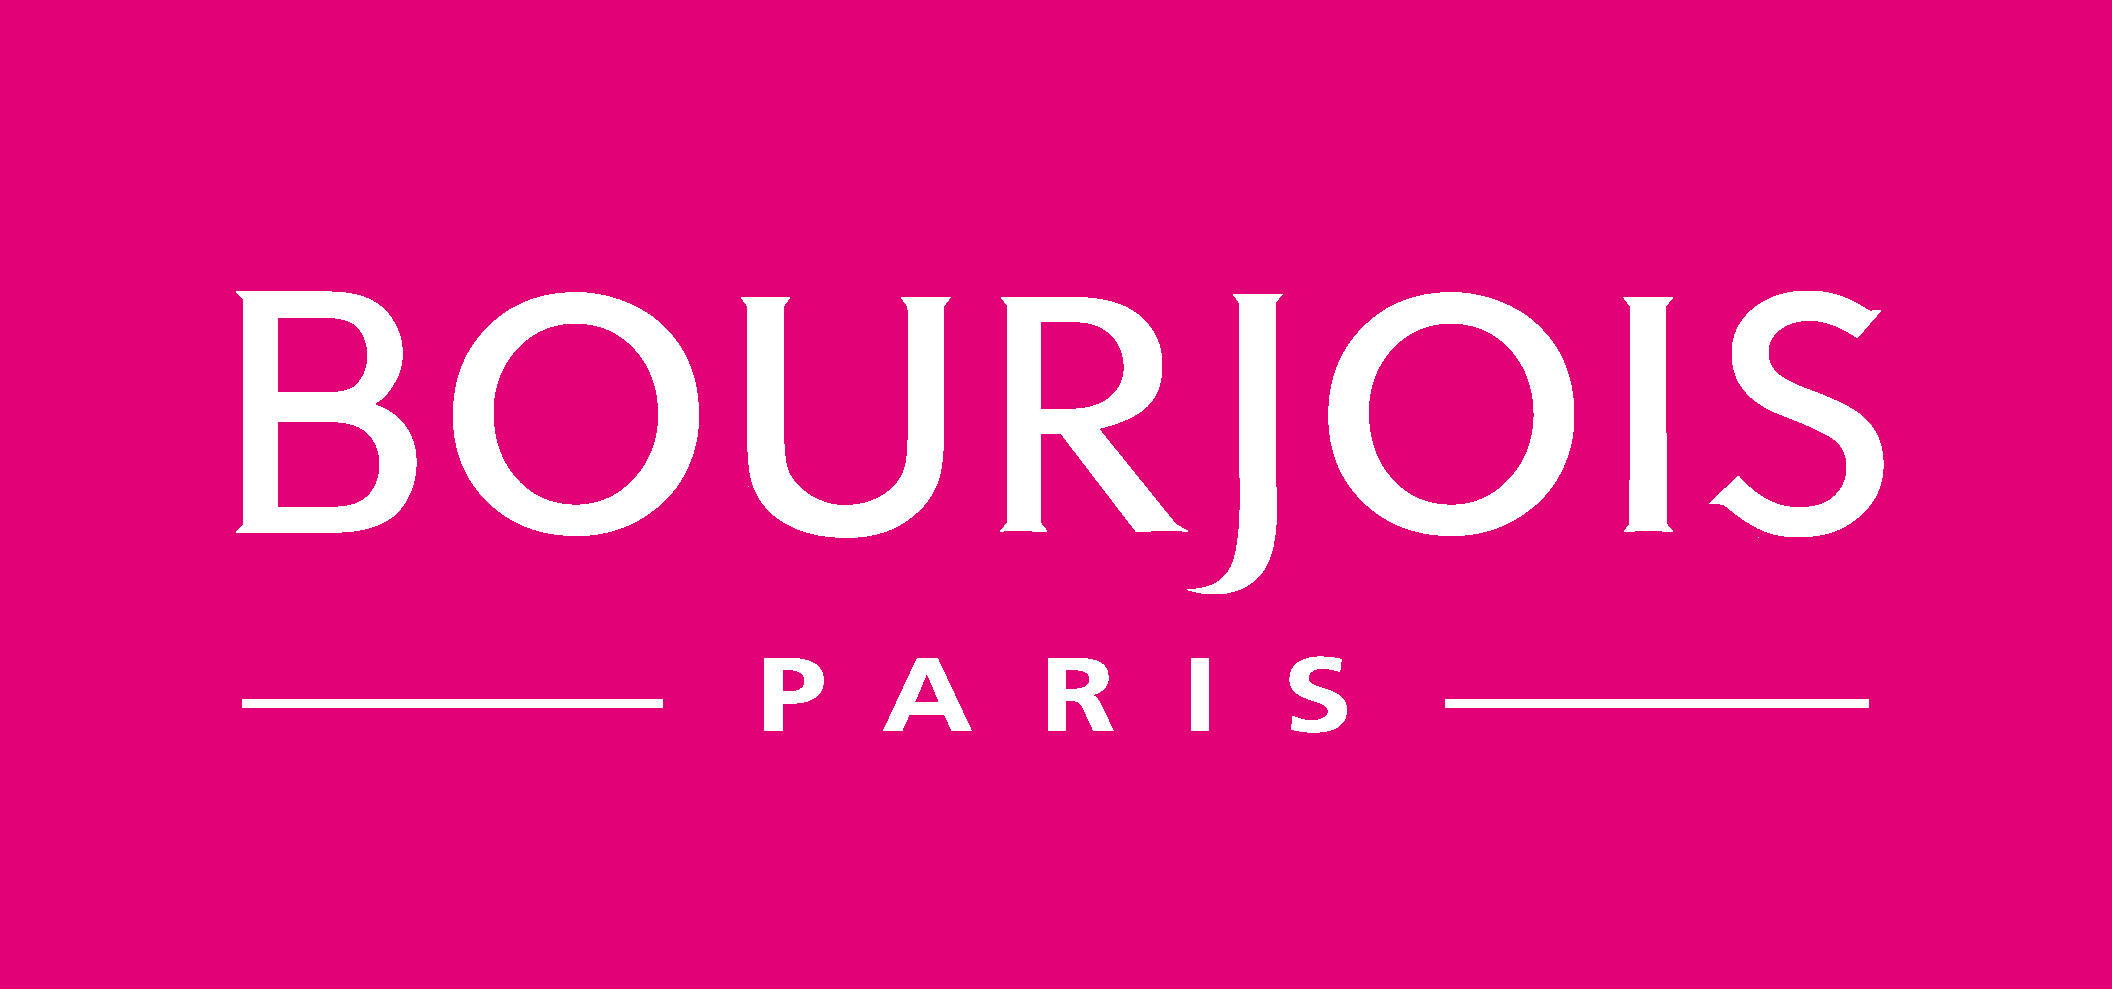 More about BOURJOIS